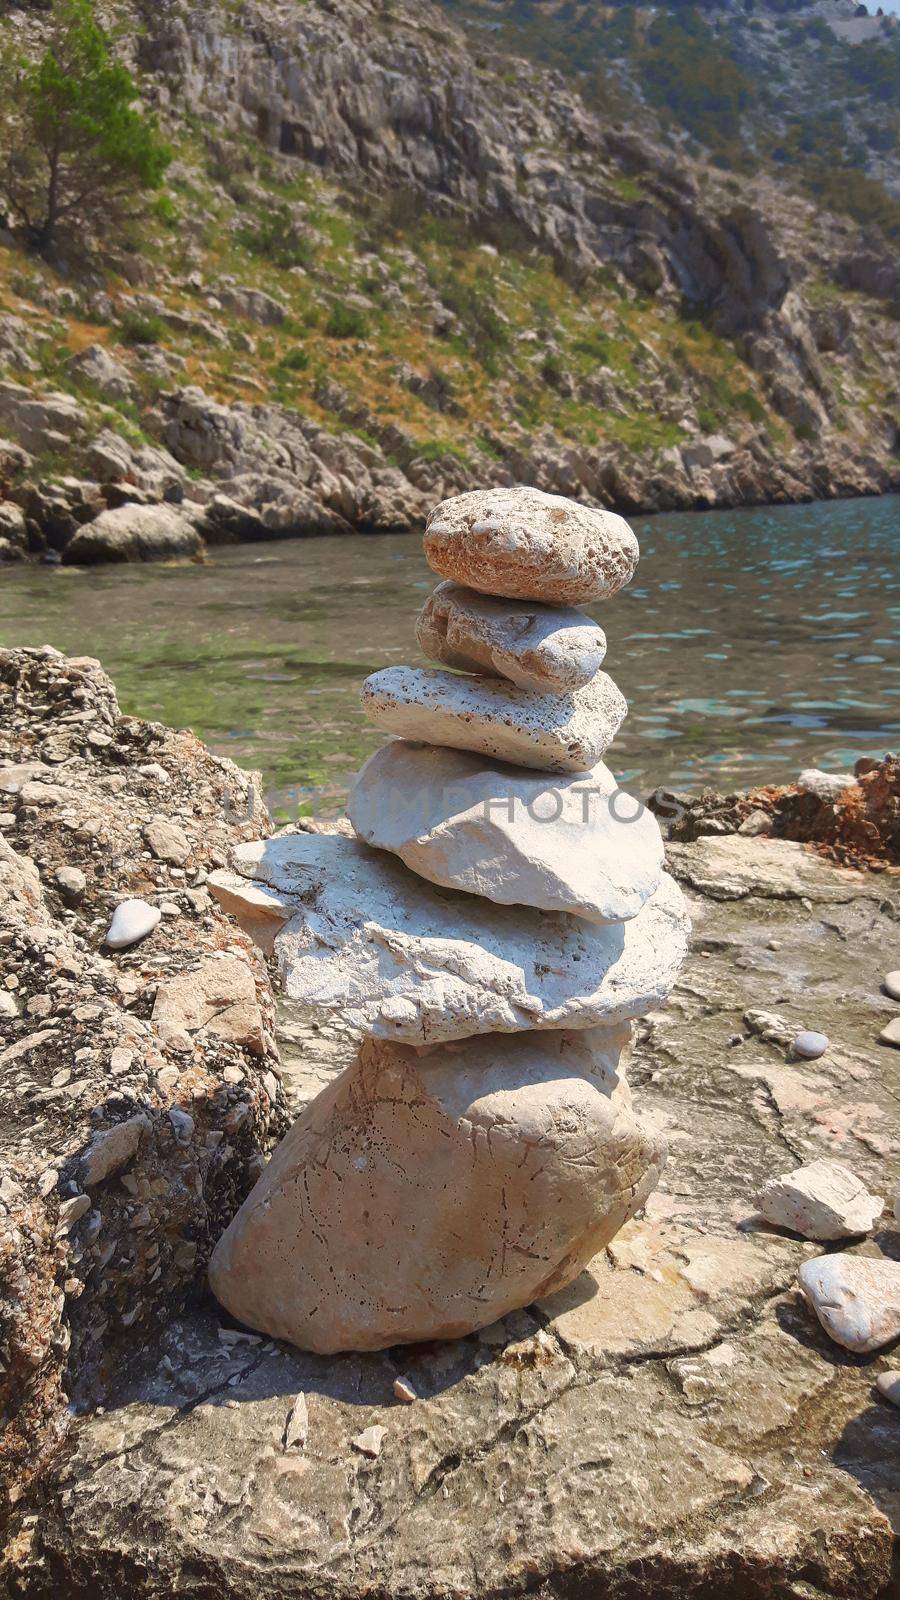 balanced Zen rocks art stacked in flowing water stream. High quality photo